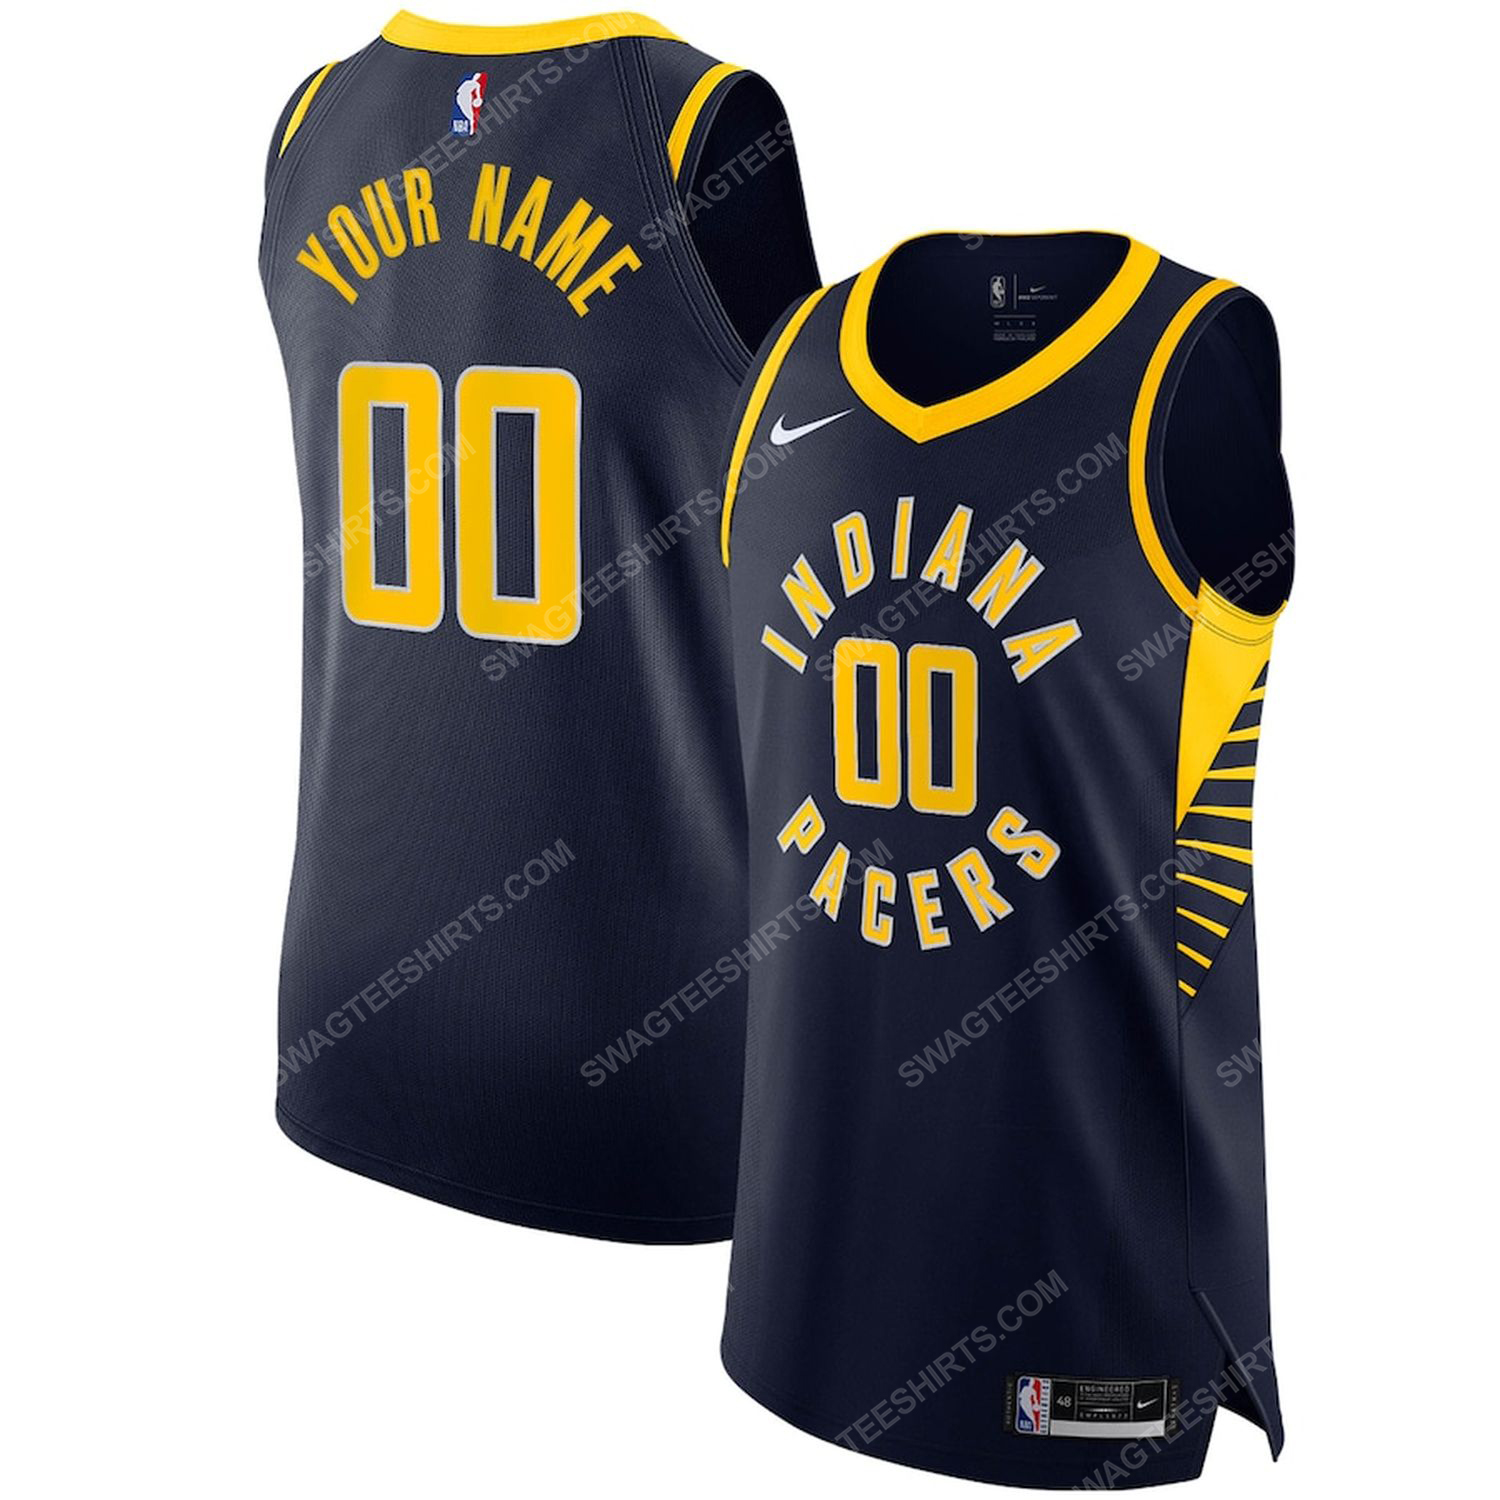 [special edition] Custom nba indiana pacers team basketball jersey – Maria